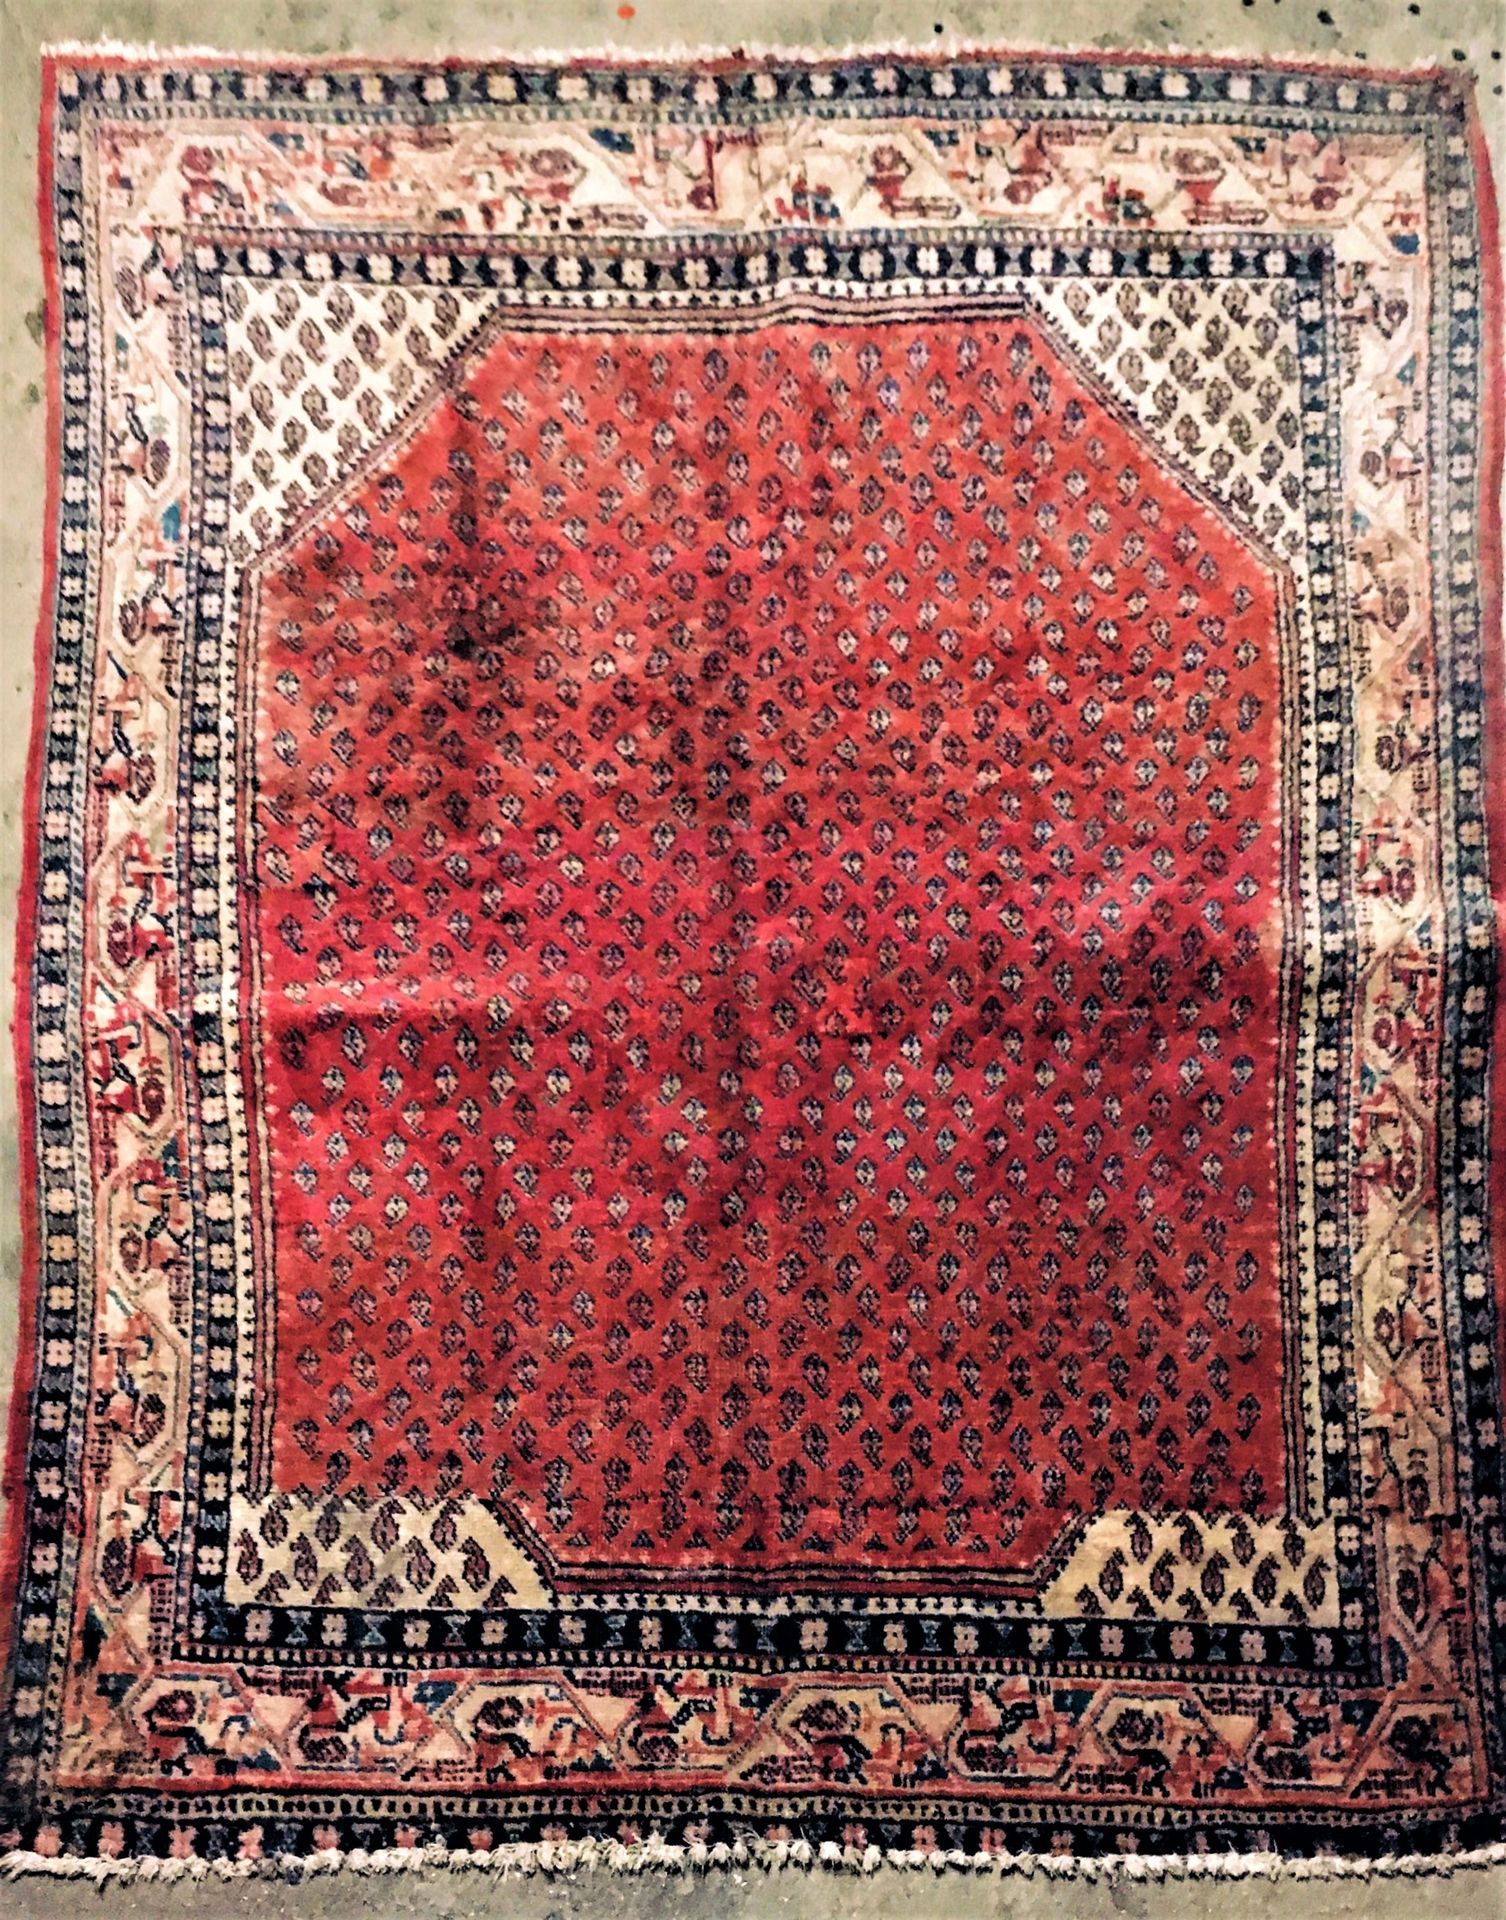 Null Mir (Persian) carpet, center Iran, cotton weft and warp, wool pile, red bac&hellip;